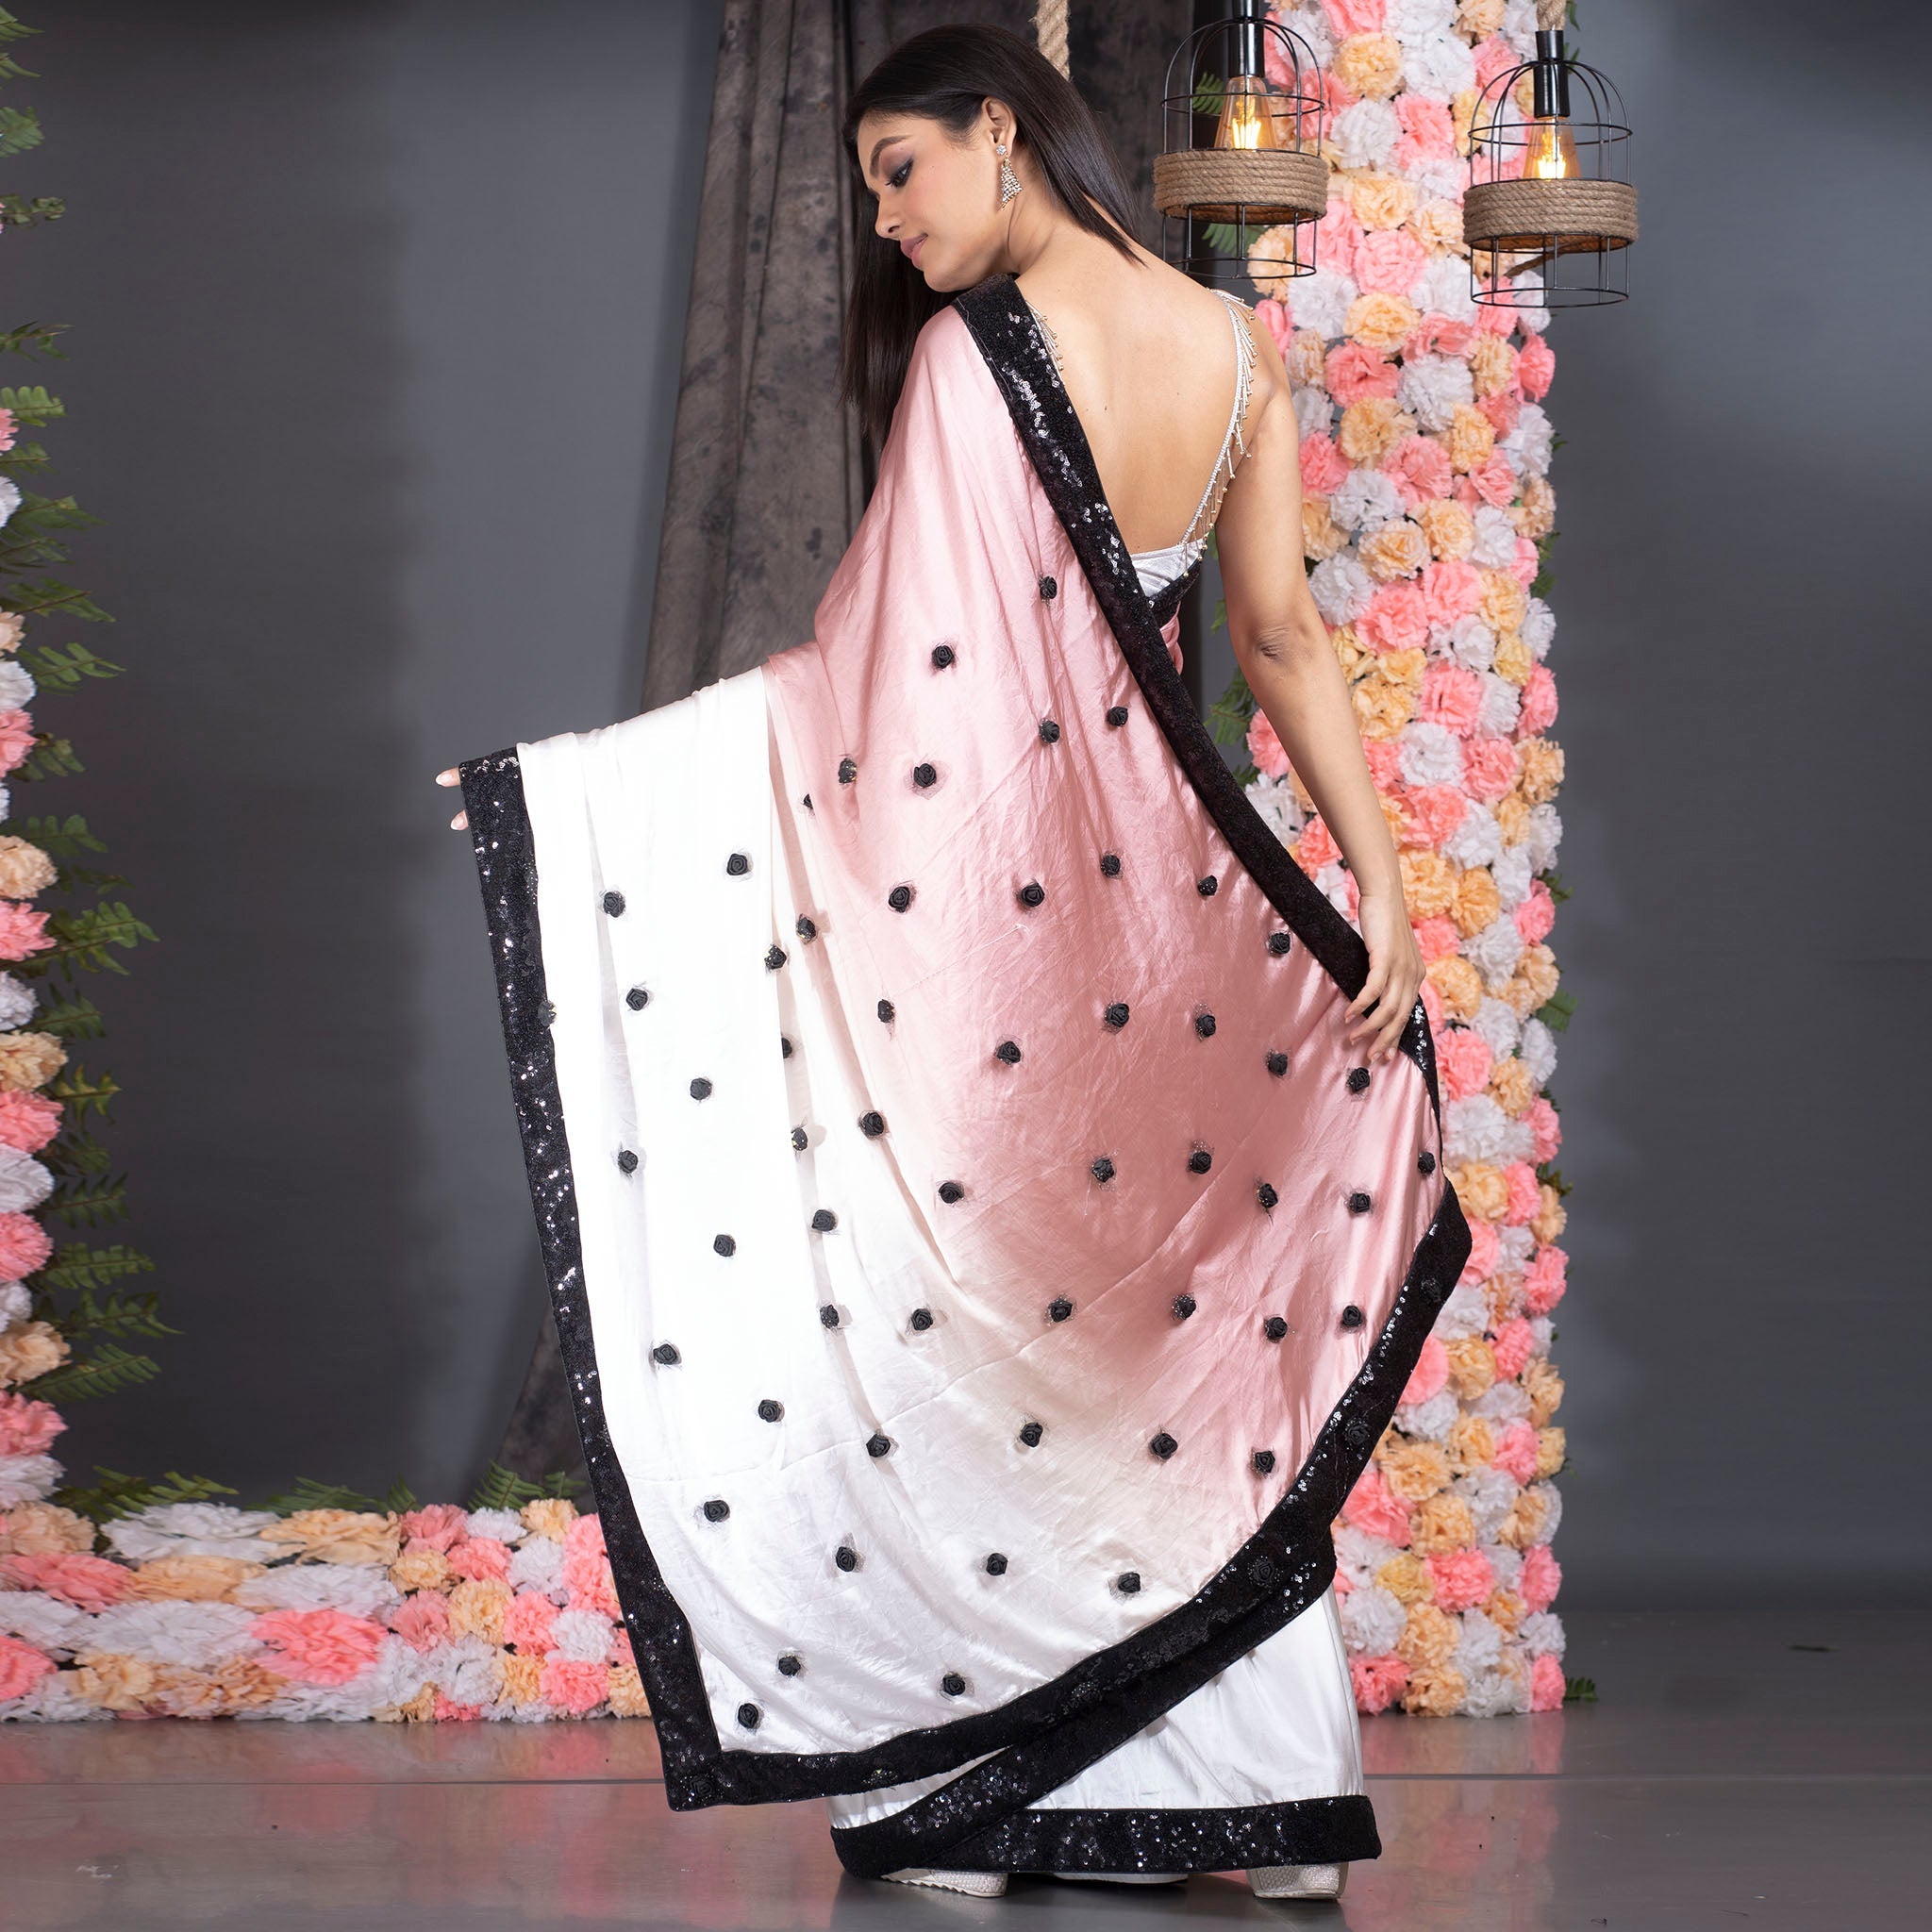 Women's Peach And Offwhite Ombre Satin Saree With Sequin Lace Border And Handmade Rosette Pallu - Boveee